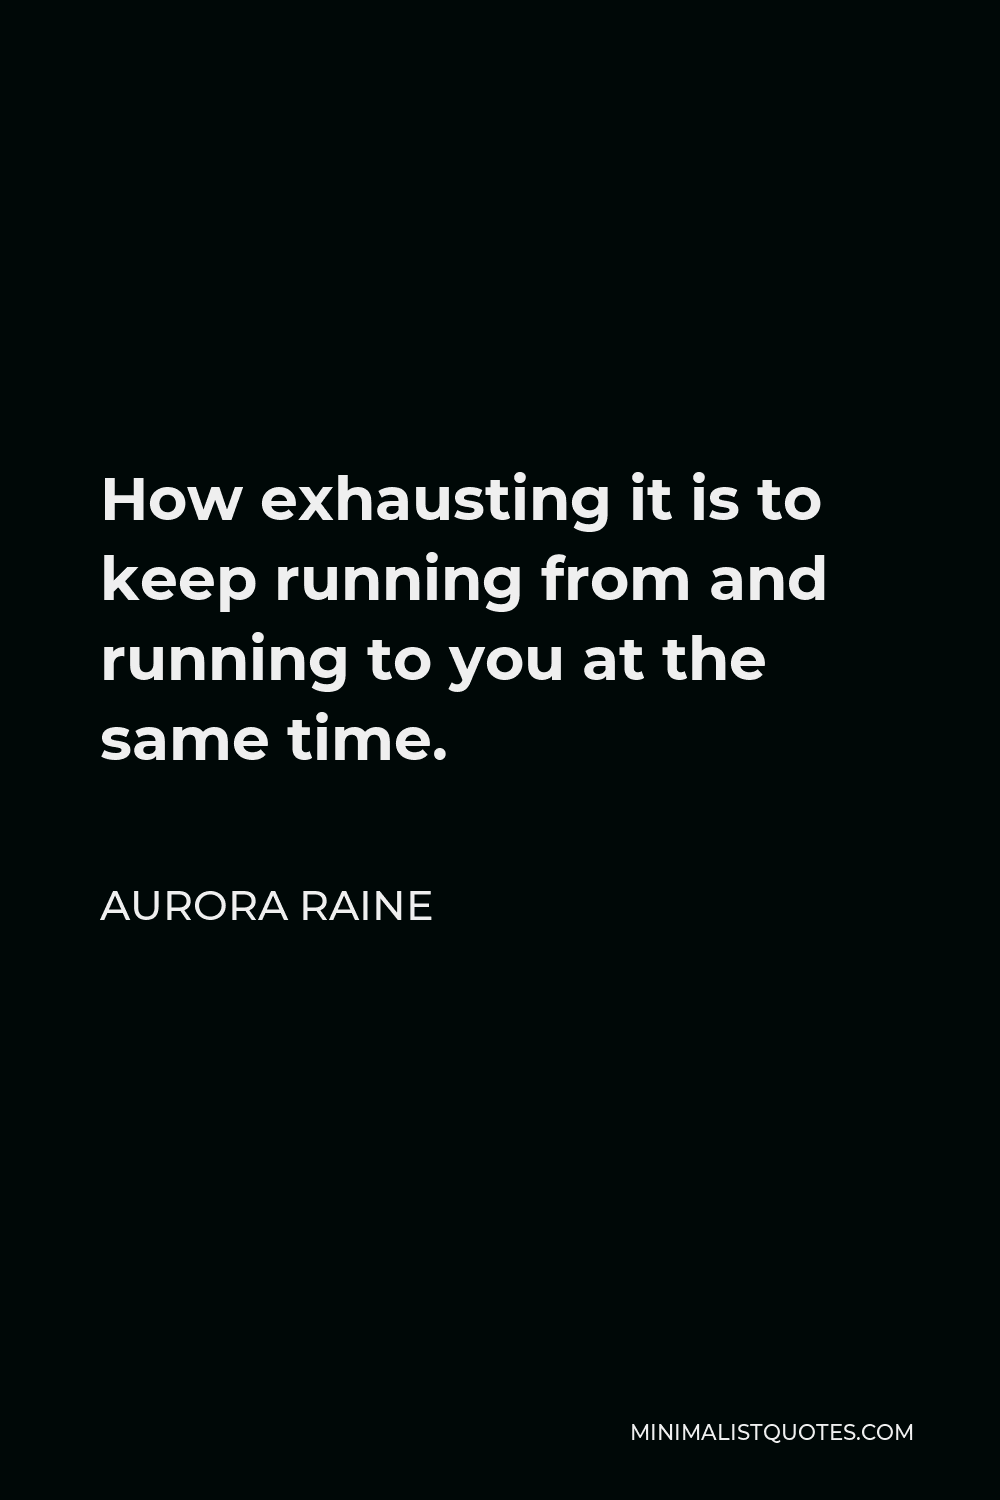 Aurora Raine Quote - How exhausting it is to keep running from and running to you at the same time.